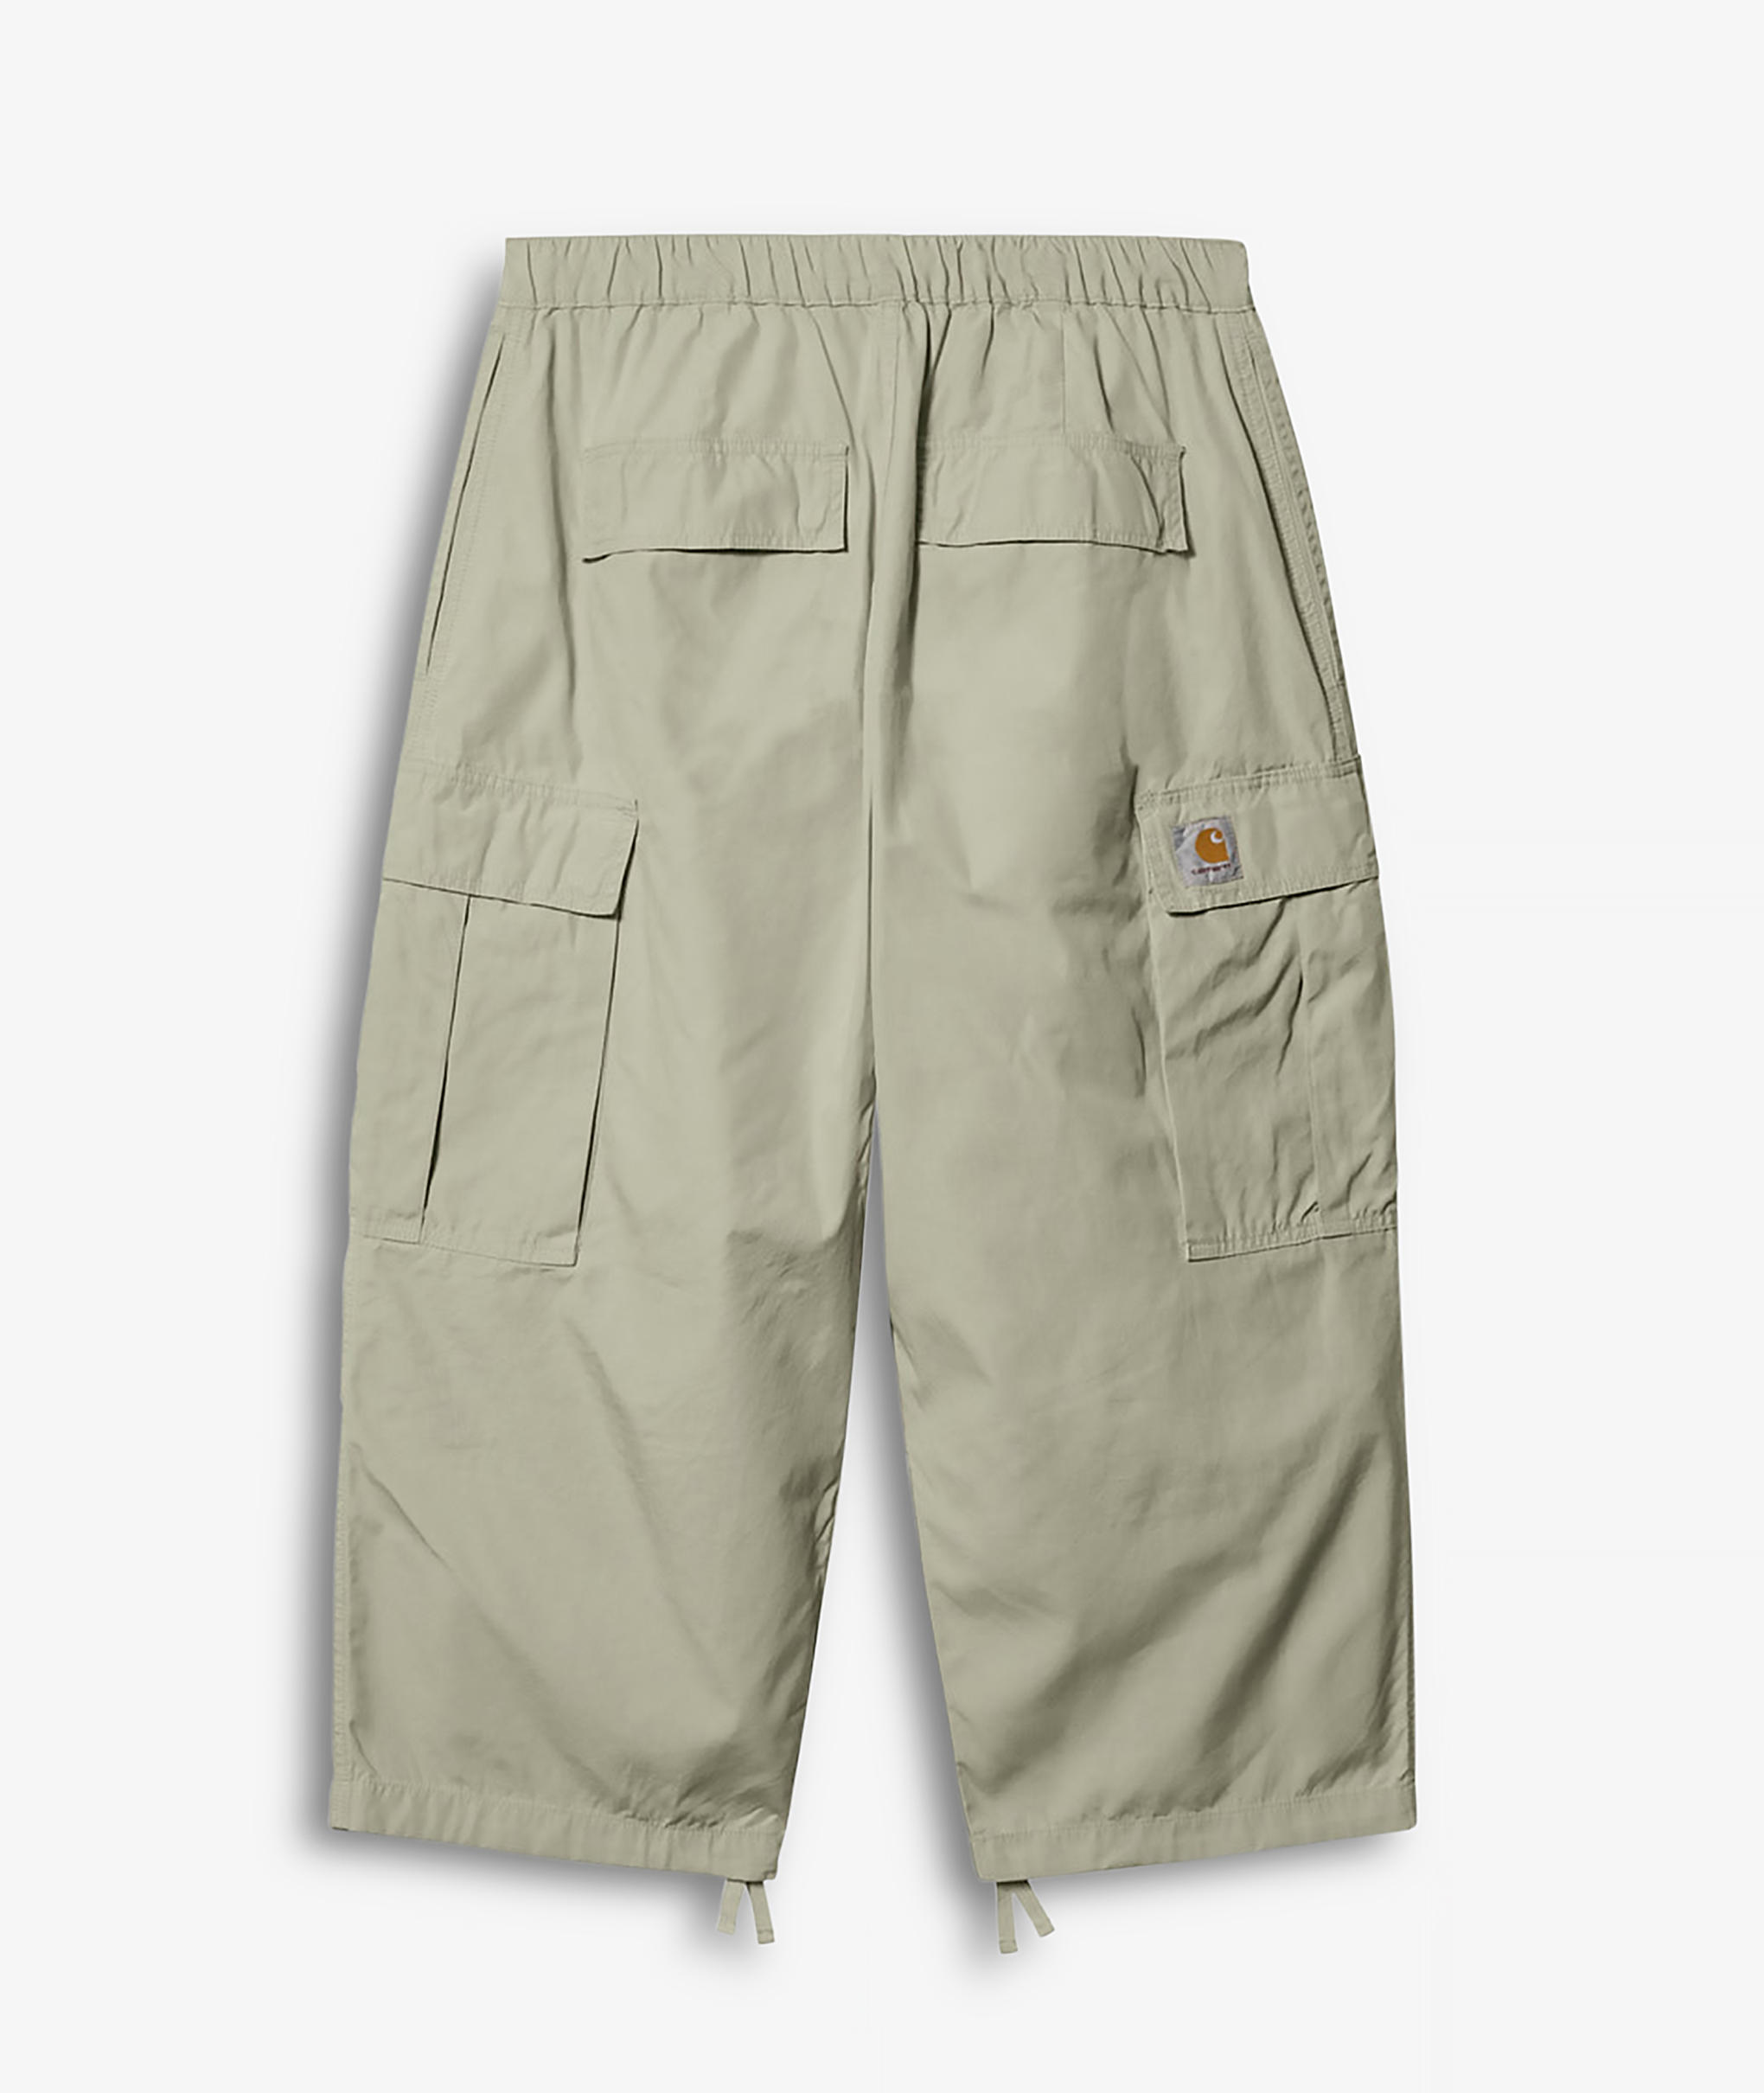 Norse Store | Shipping Worldwide - Carhartt WIP Jet Cargo Pant - Yucca ...